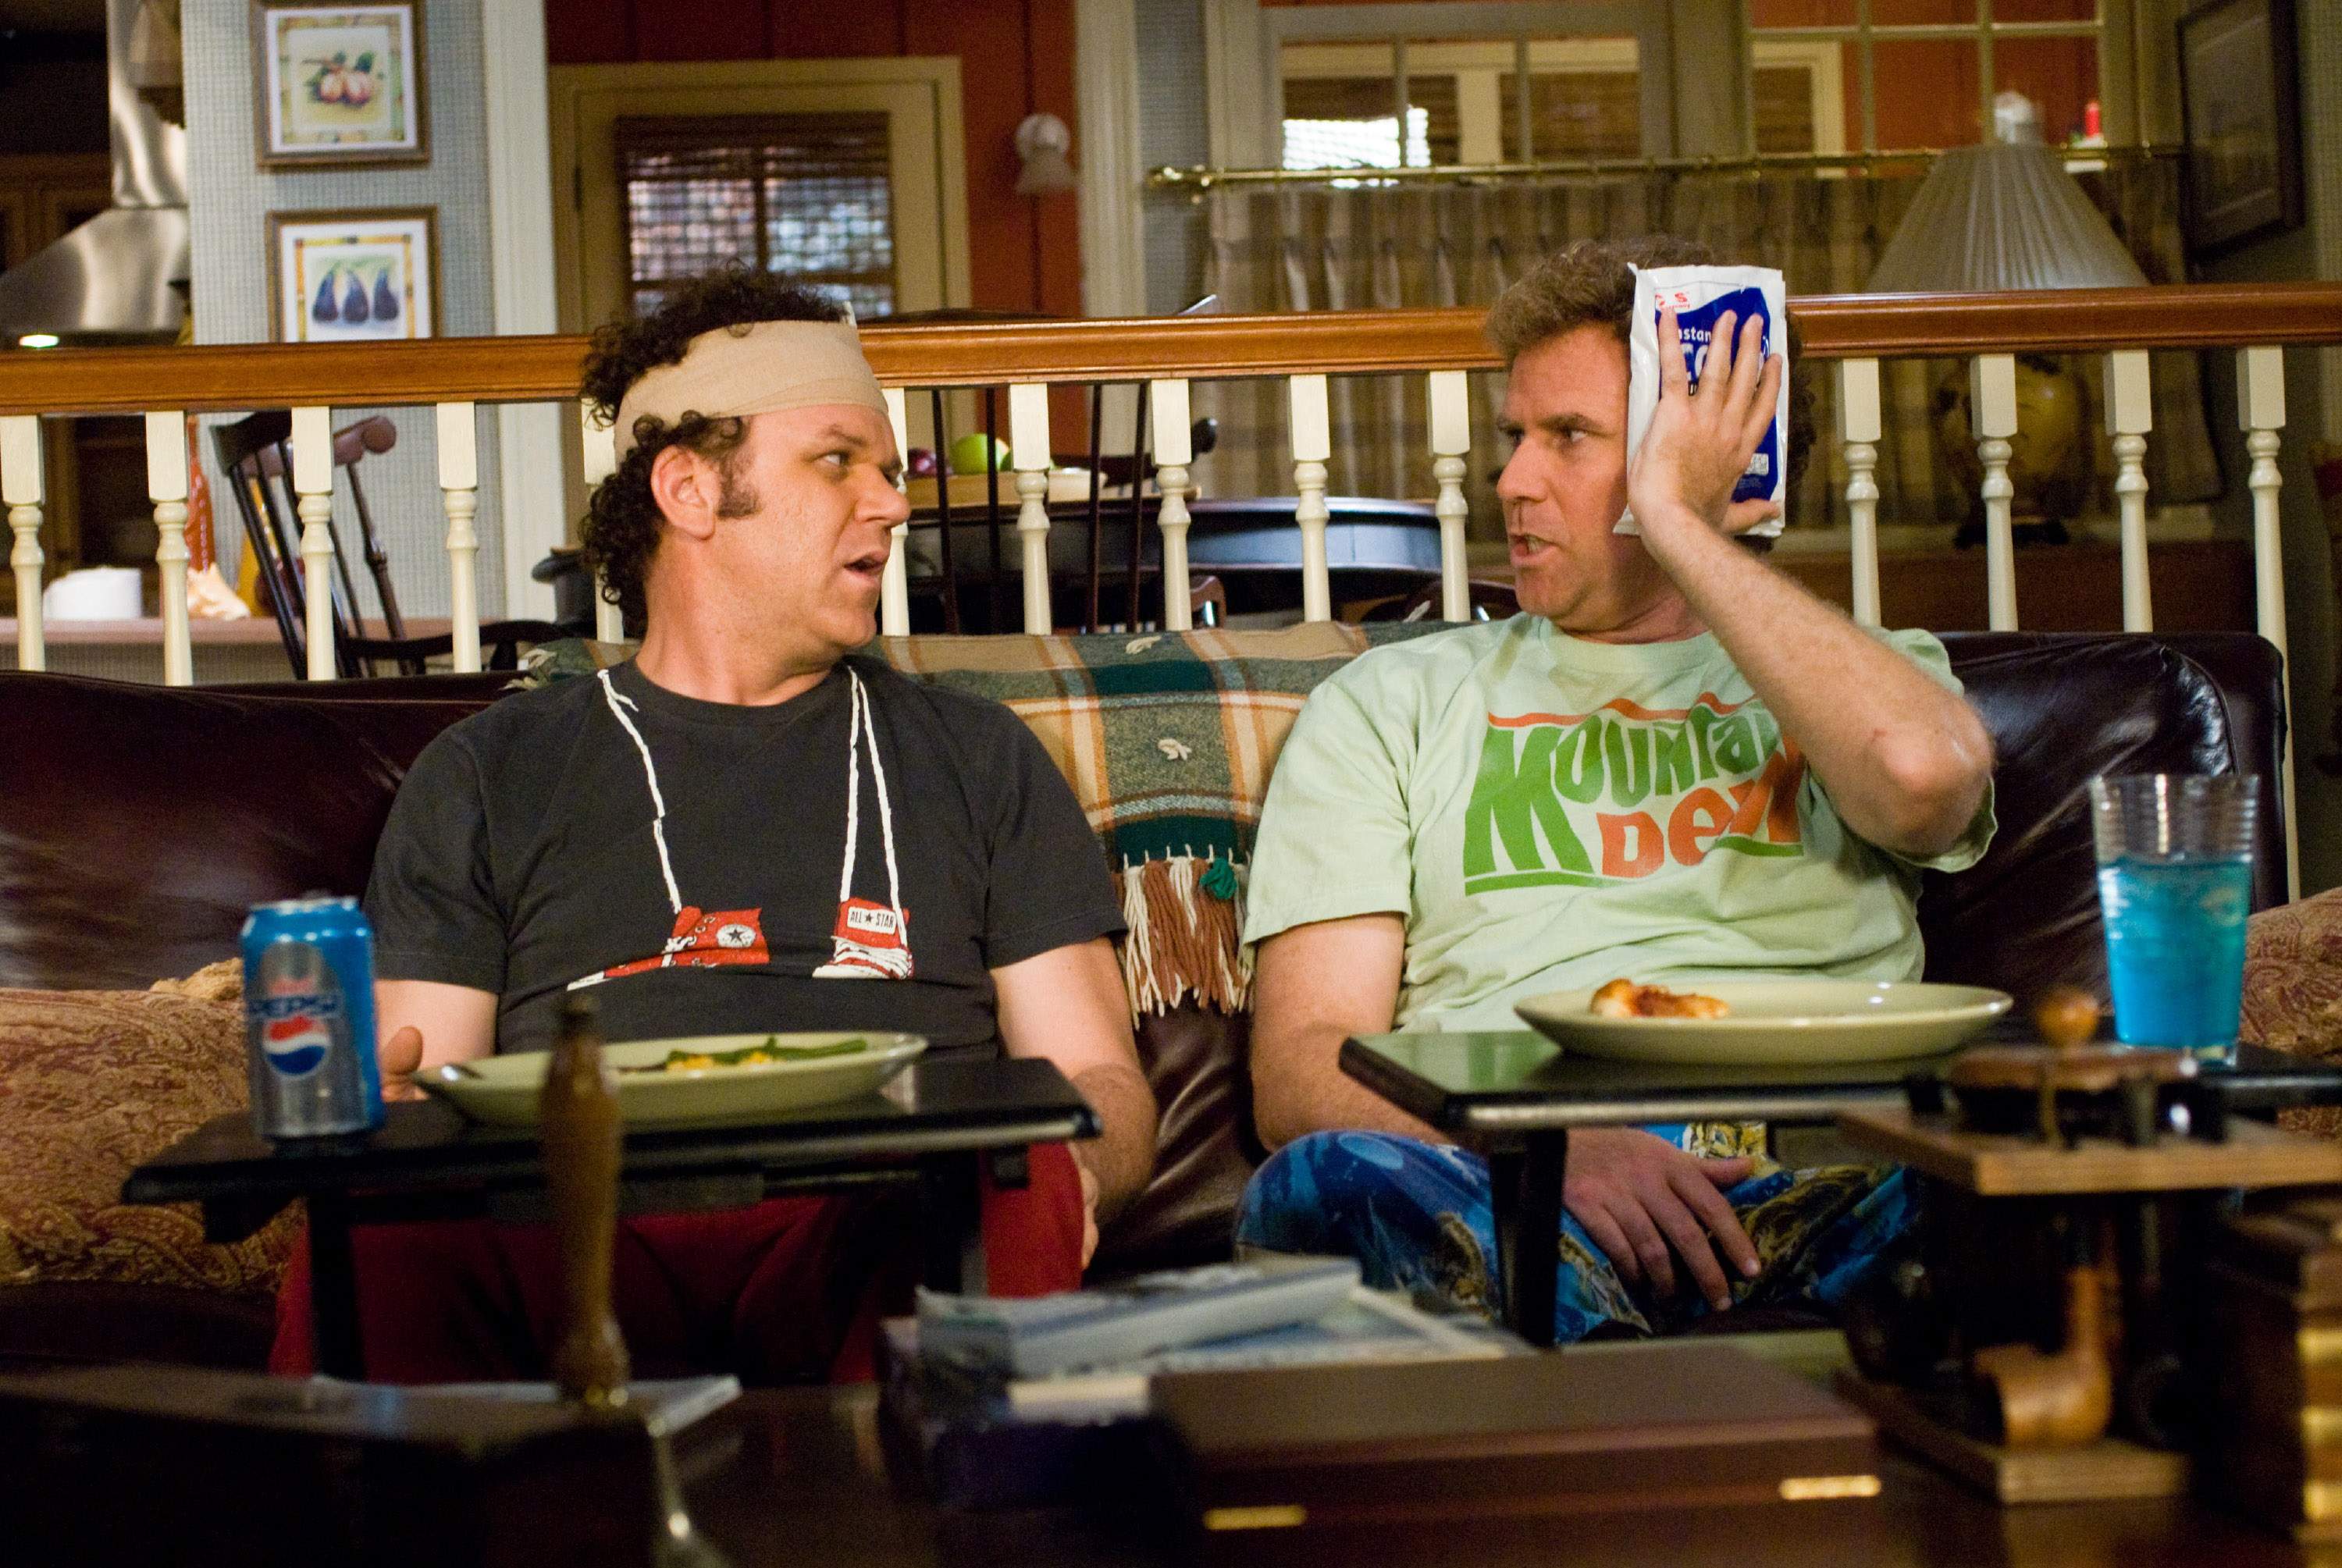 John C. Reilly as Dale Doback (left) and Will Ferrell as Brennan Huff (right) in Columbia Pictures' comedy STEP BROTHERS (2008).